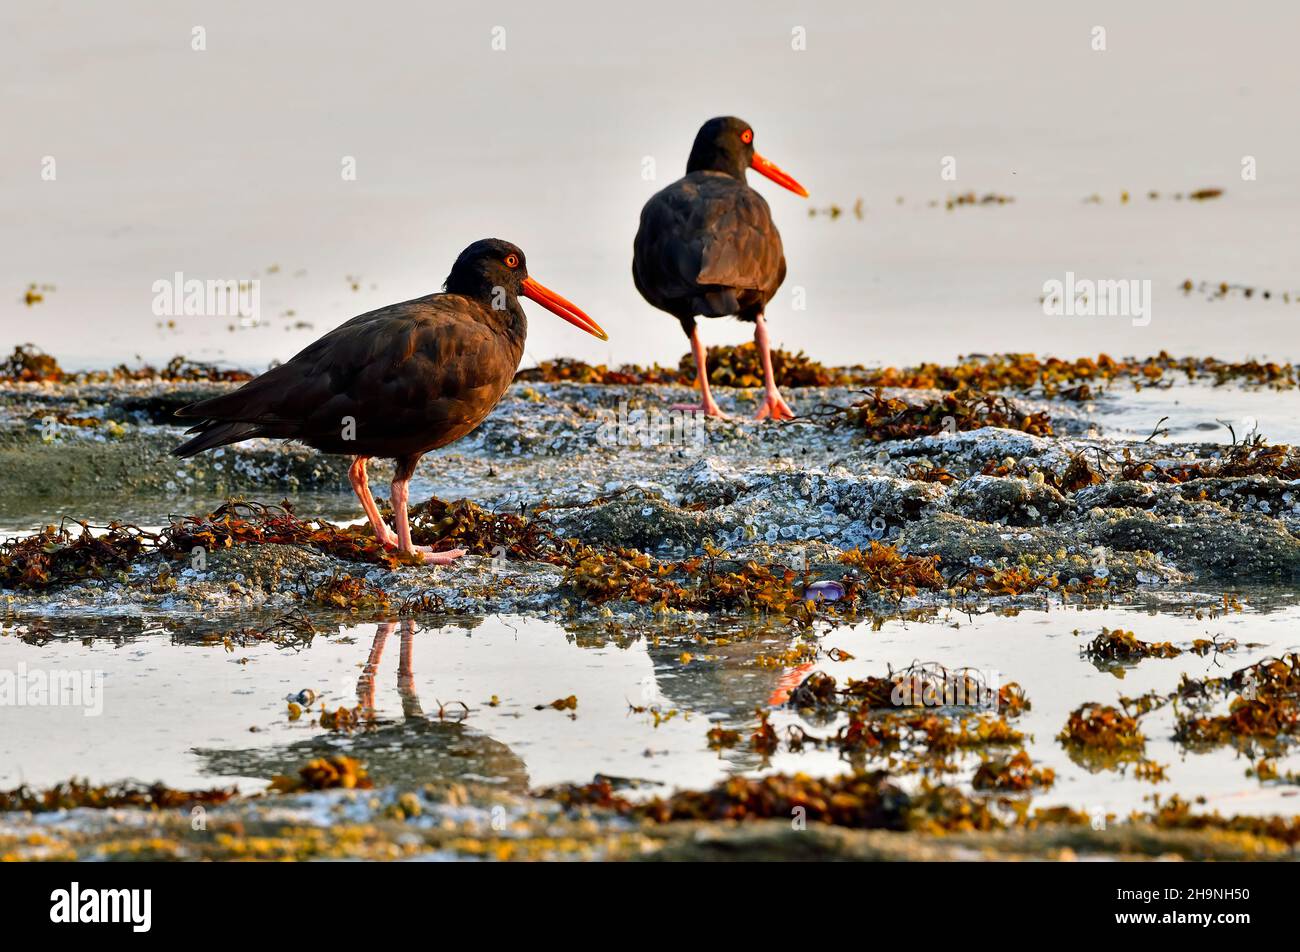 A Black Oyster Catcher birds (Haematopus bachmani)  foraging in the early morning light foraging along the shore of Vancouver Island British Columbia Stock Photo